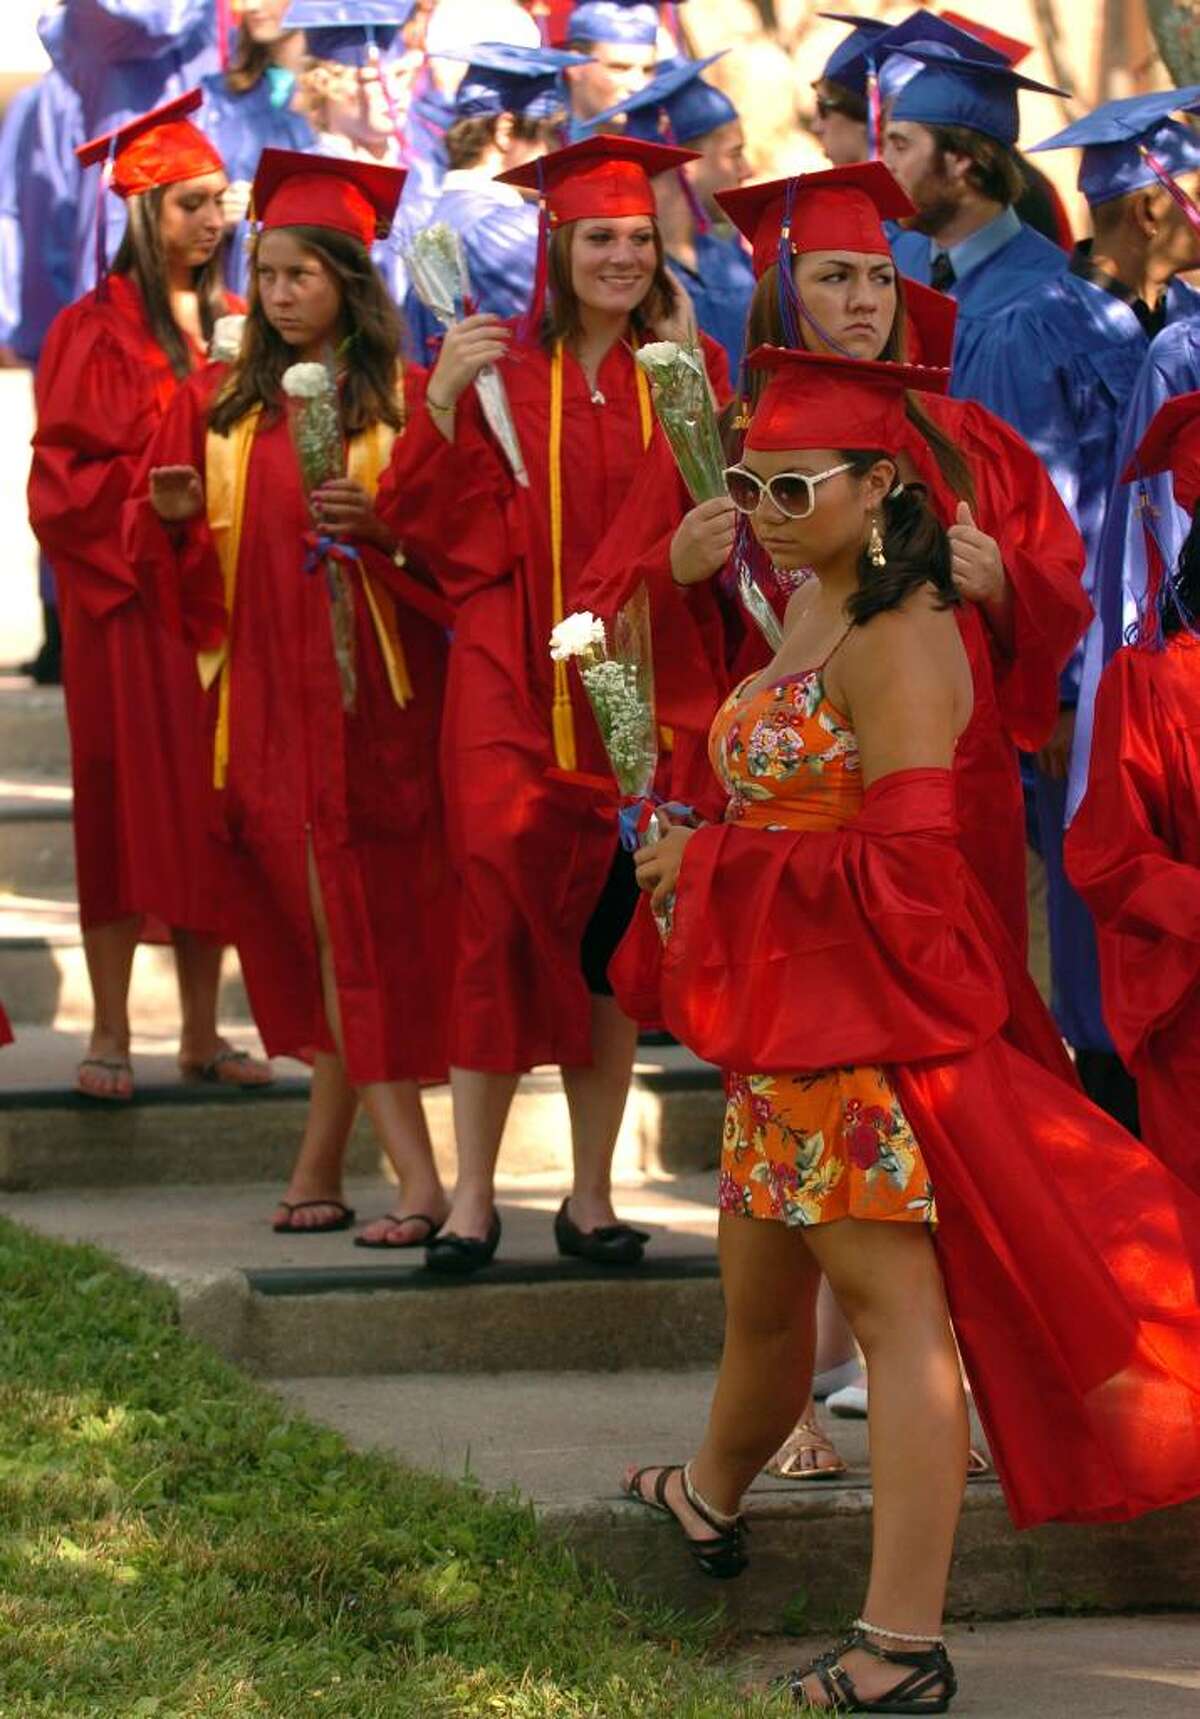 Because of the high temperatures, graduate Carly Cammarano keeps her graduation gown off to keep cool, before the start of Foran High School's Graduation Exercises in Milford, Conn. on Wednesday June 23, 2010.